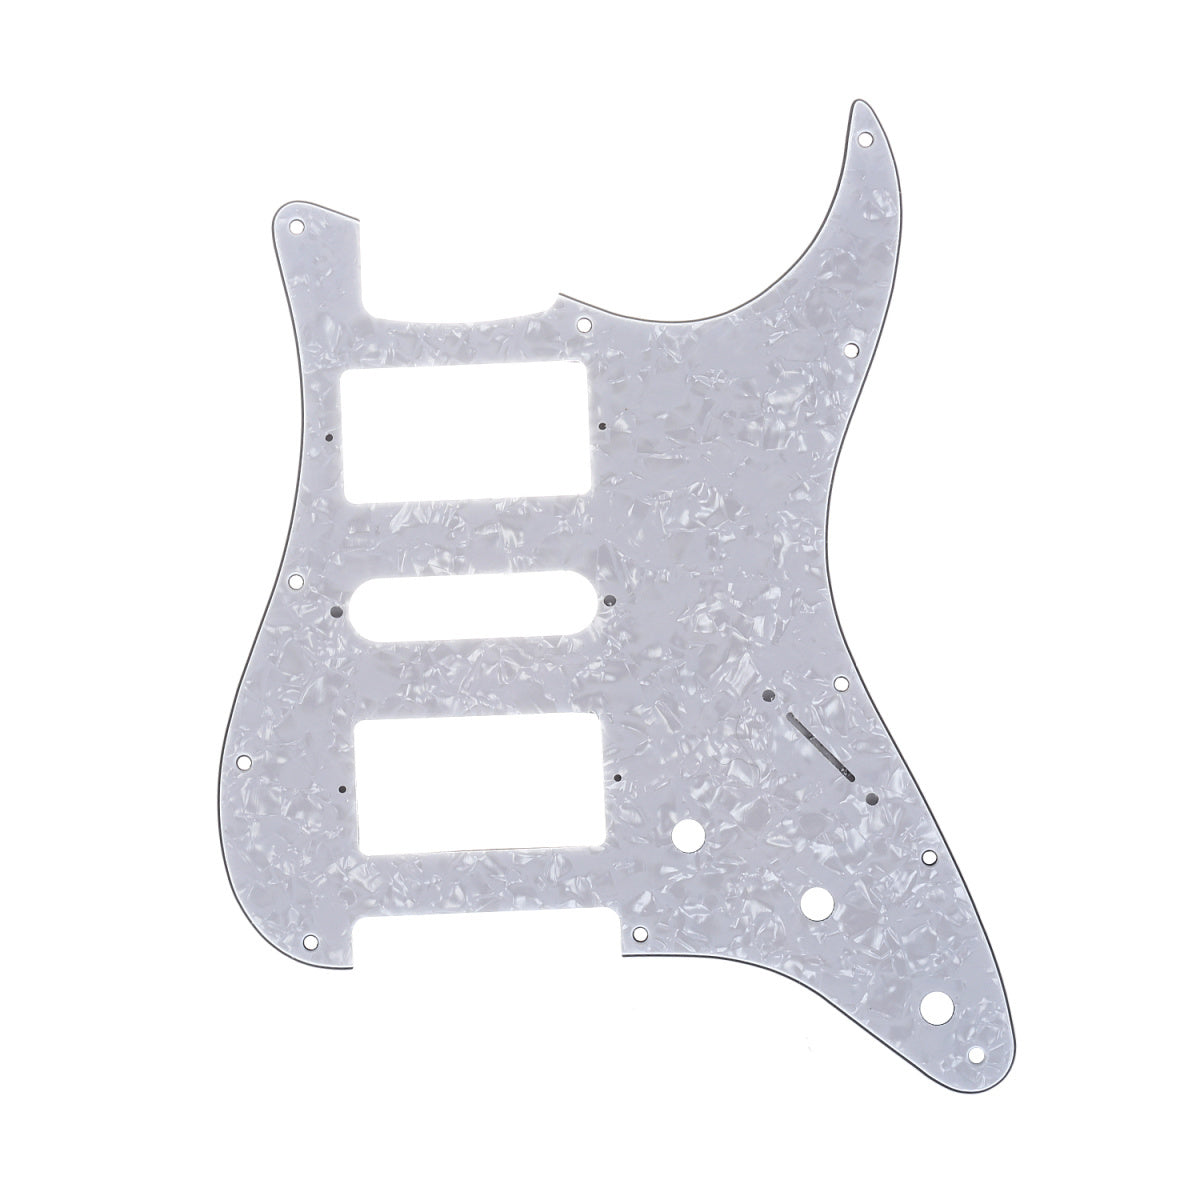 Musiclily Pro 11 Hole HSH Guitar Strat Pickguard for Fender American/Mexican Standard Stratocaster Modern Style, 4Ply White Pearl